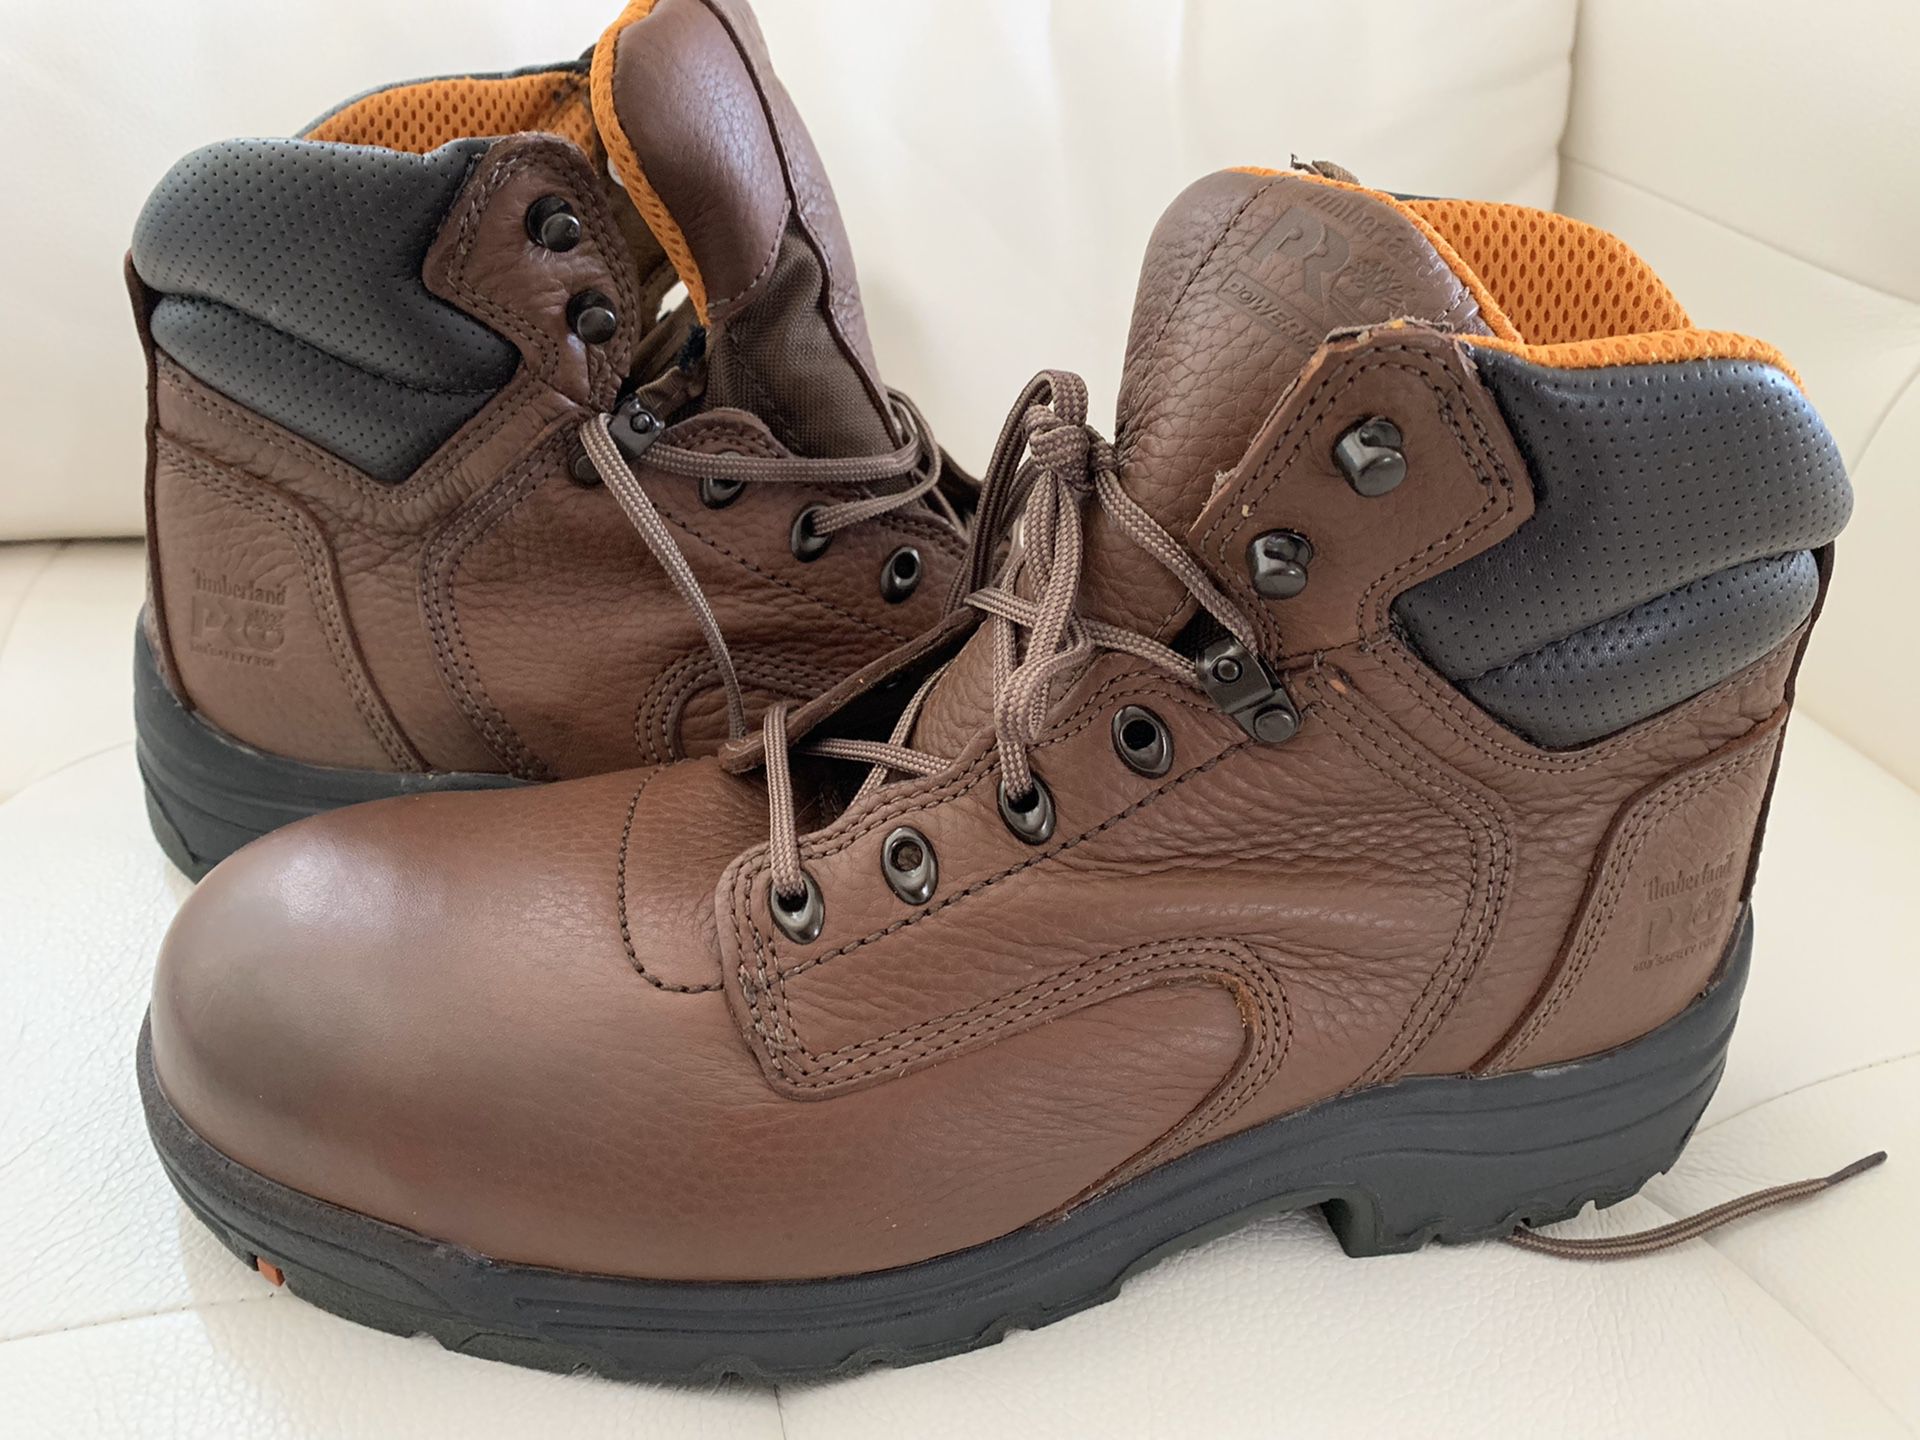 Timberland Work Boots (Steel Toe) Slip and Oil Resistance